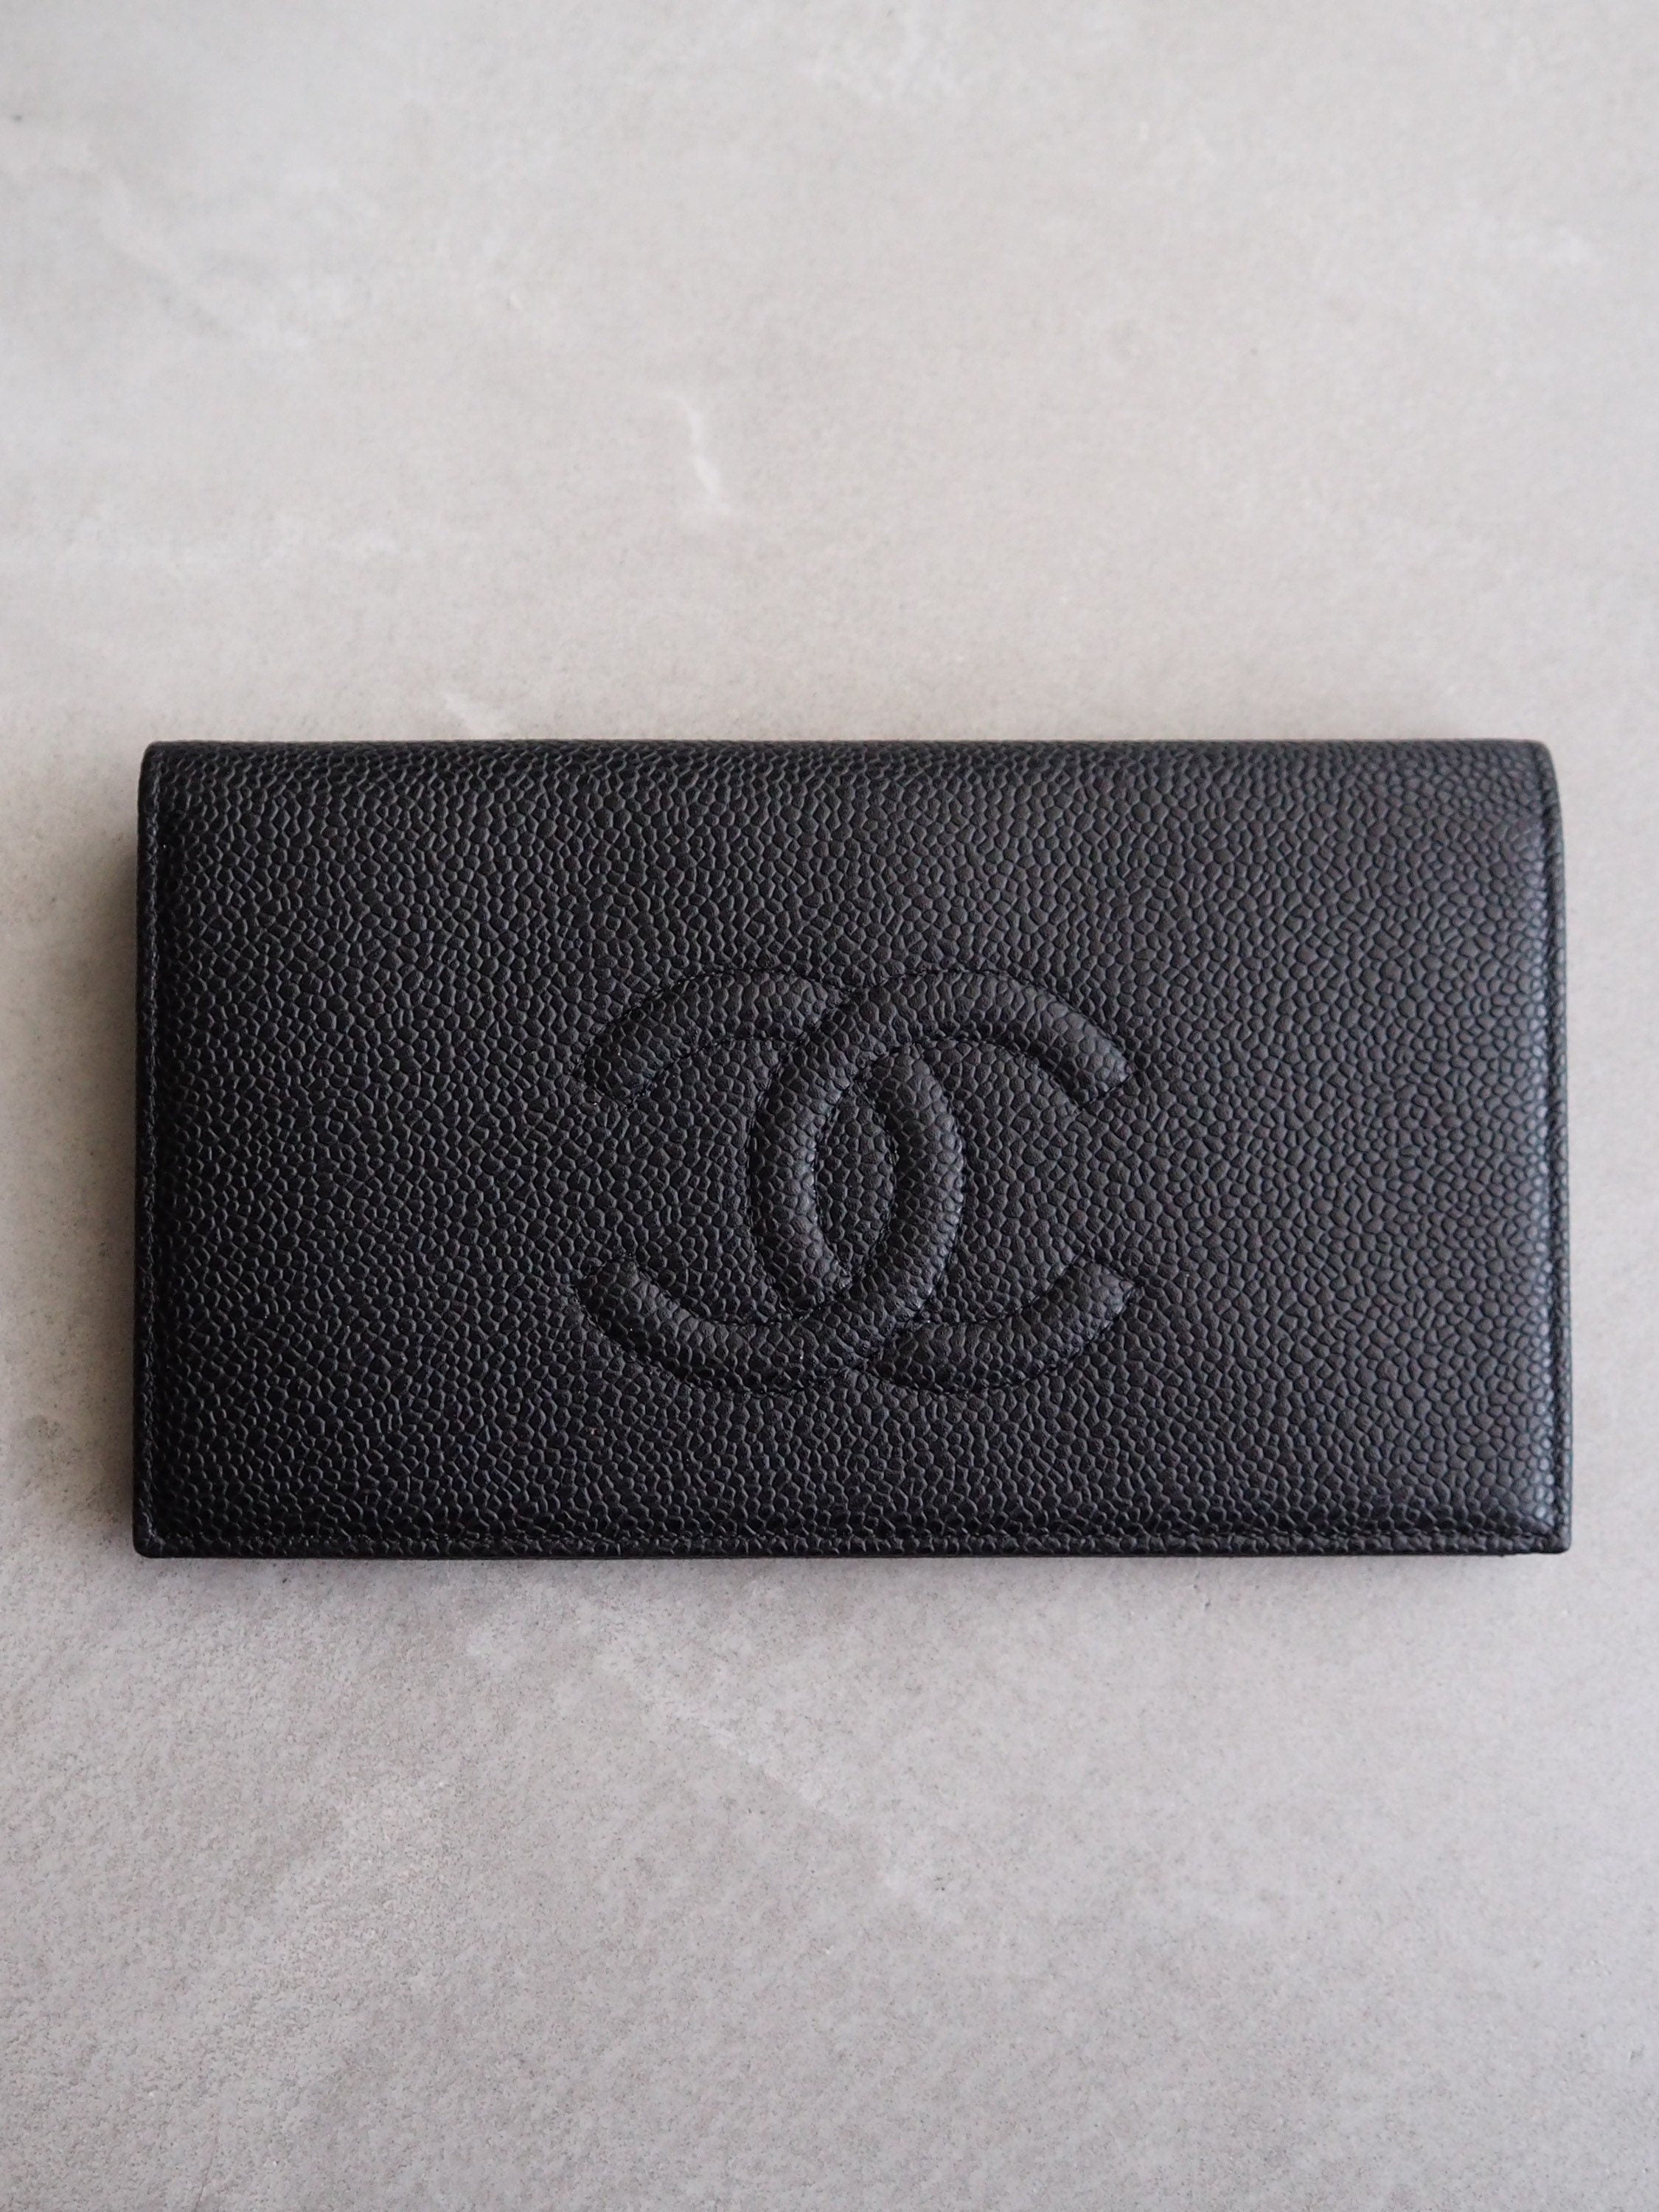 CHANEL COCO Long Wallet Purse Caviar Skin Leather Black Authentic Vintage Box